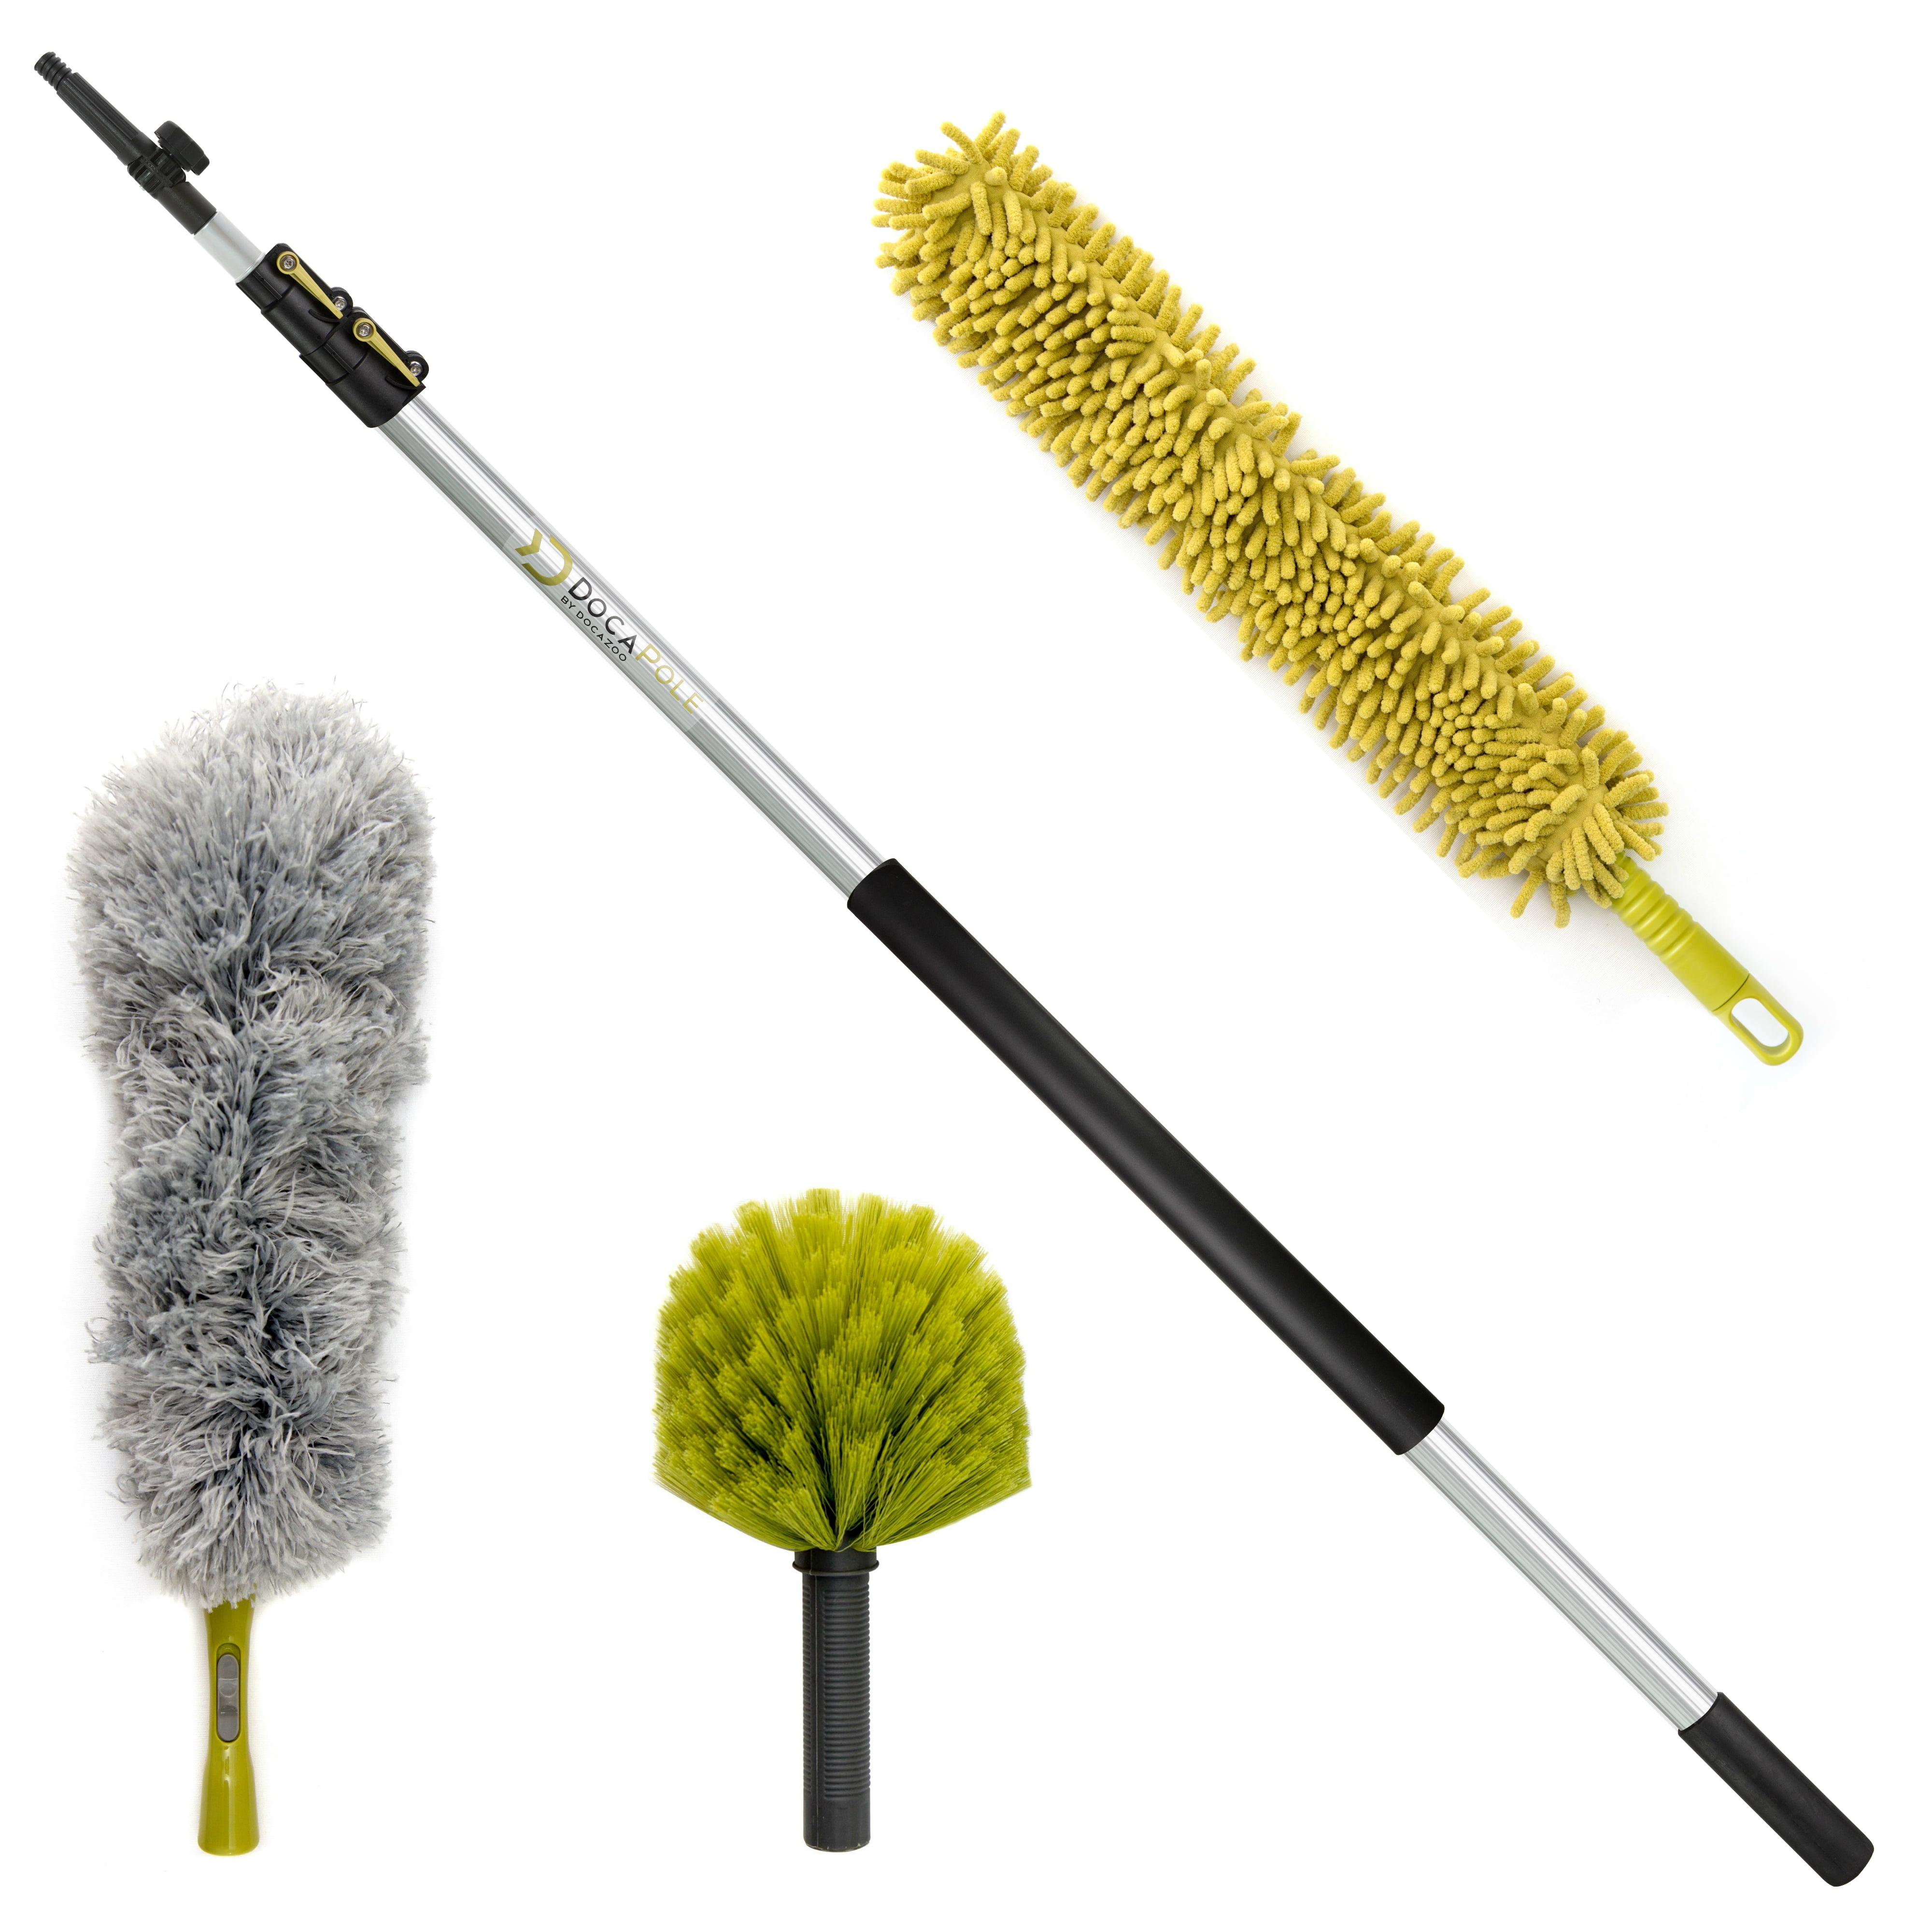 Docapole Cleaning Kit With 24 Foot Extension Pole // Includes 3 Dusting Attachme